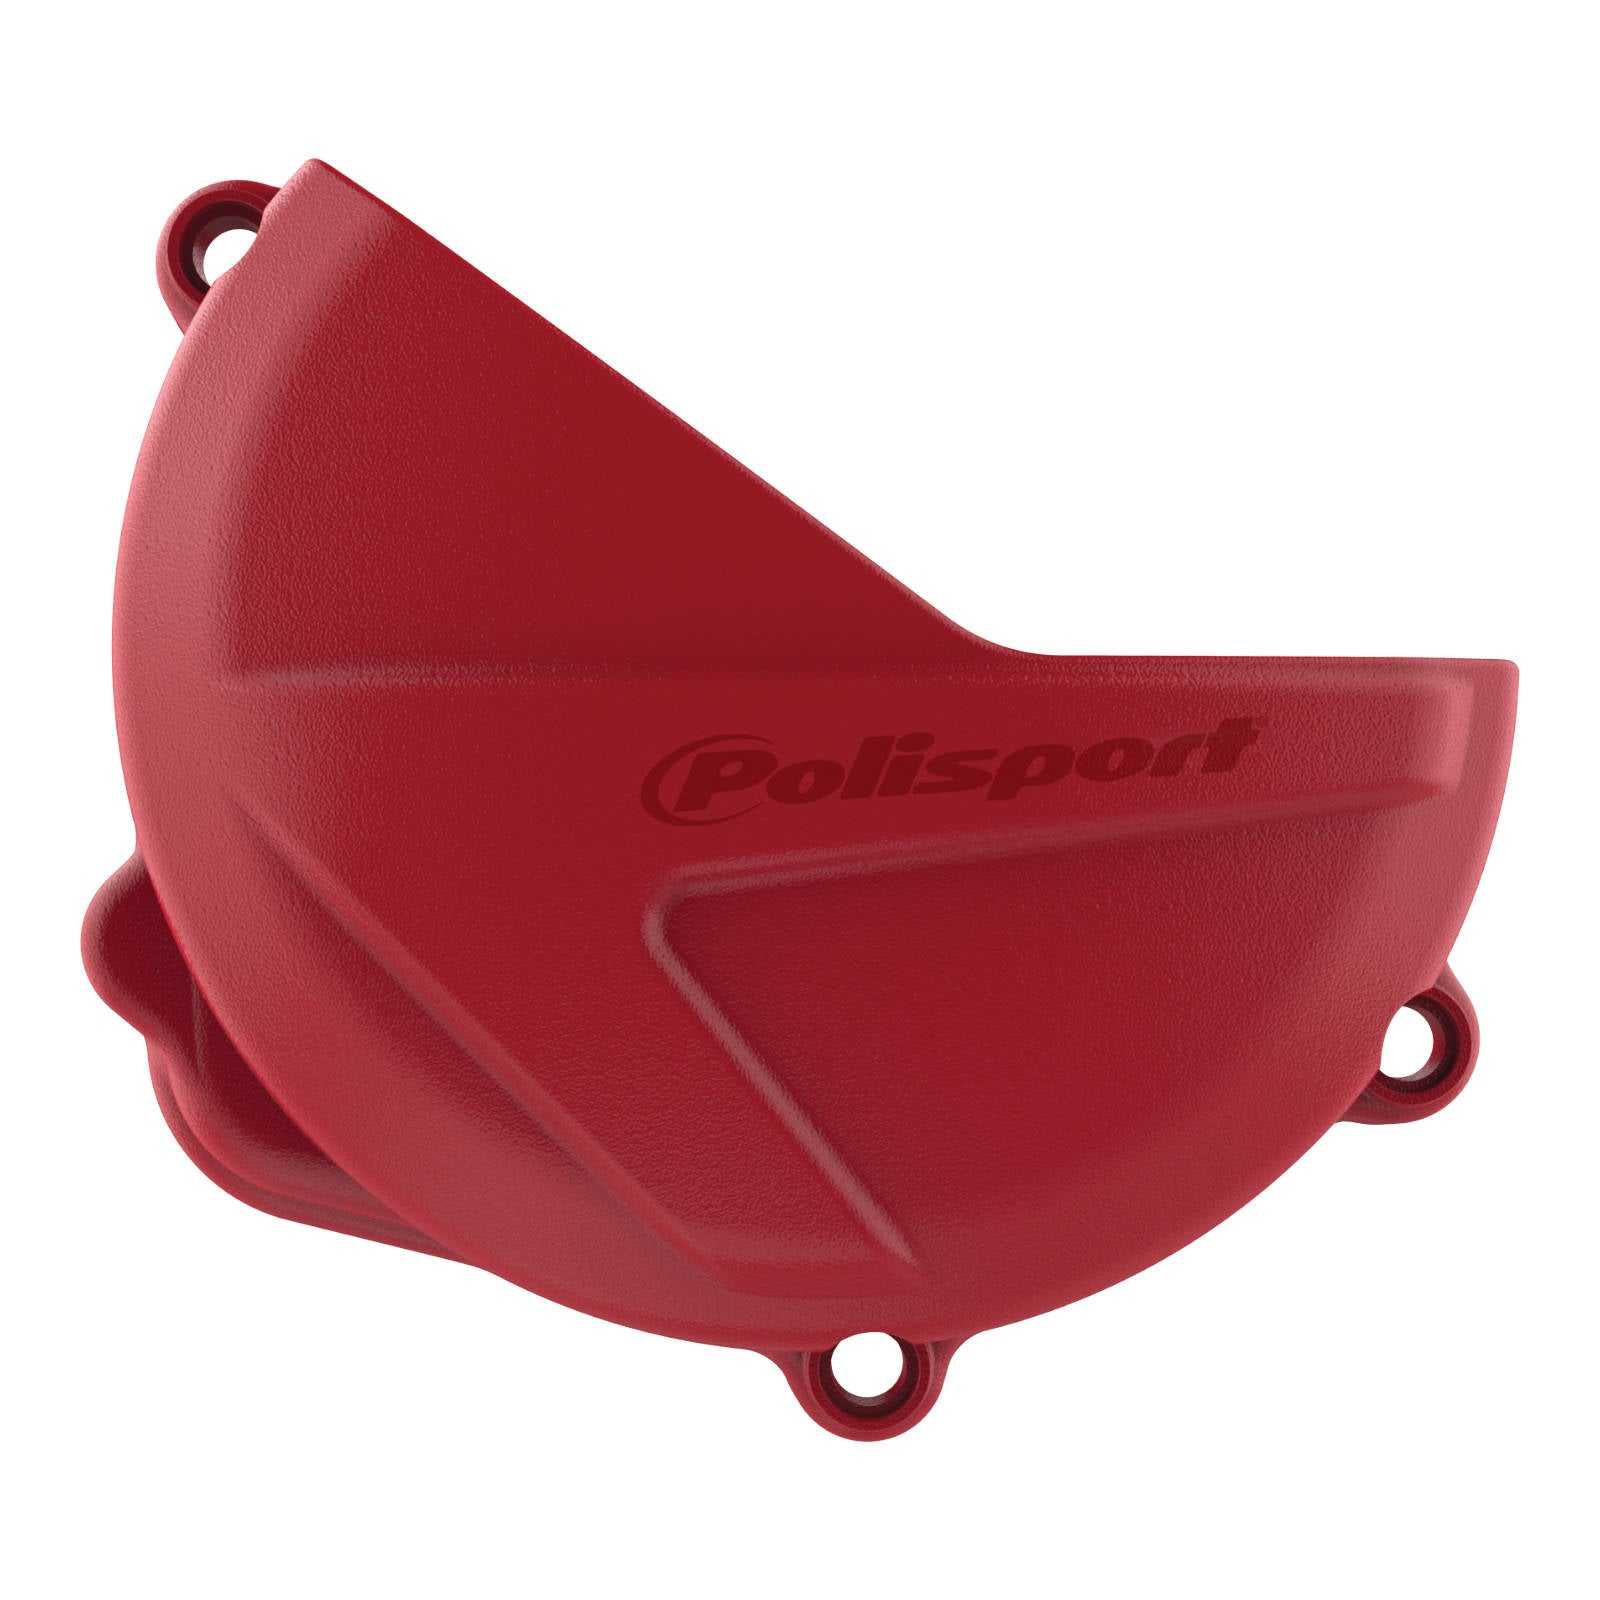 POLISPORT, CLUTCH COVER PROTECTOR HON CRF250R 18-19 - RED